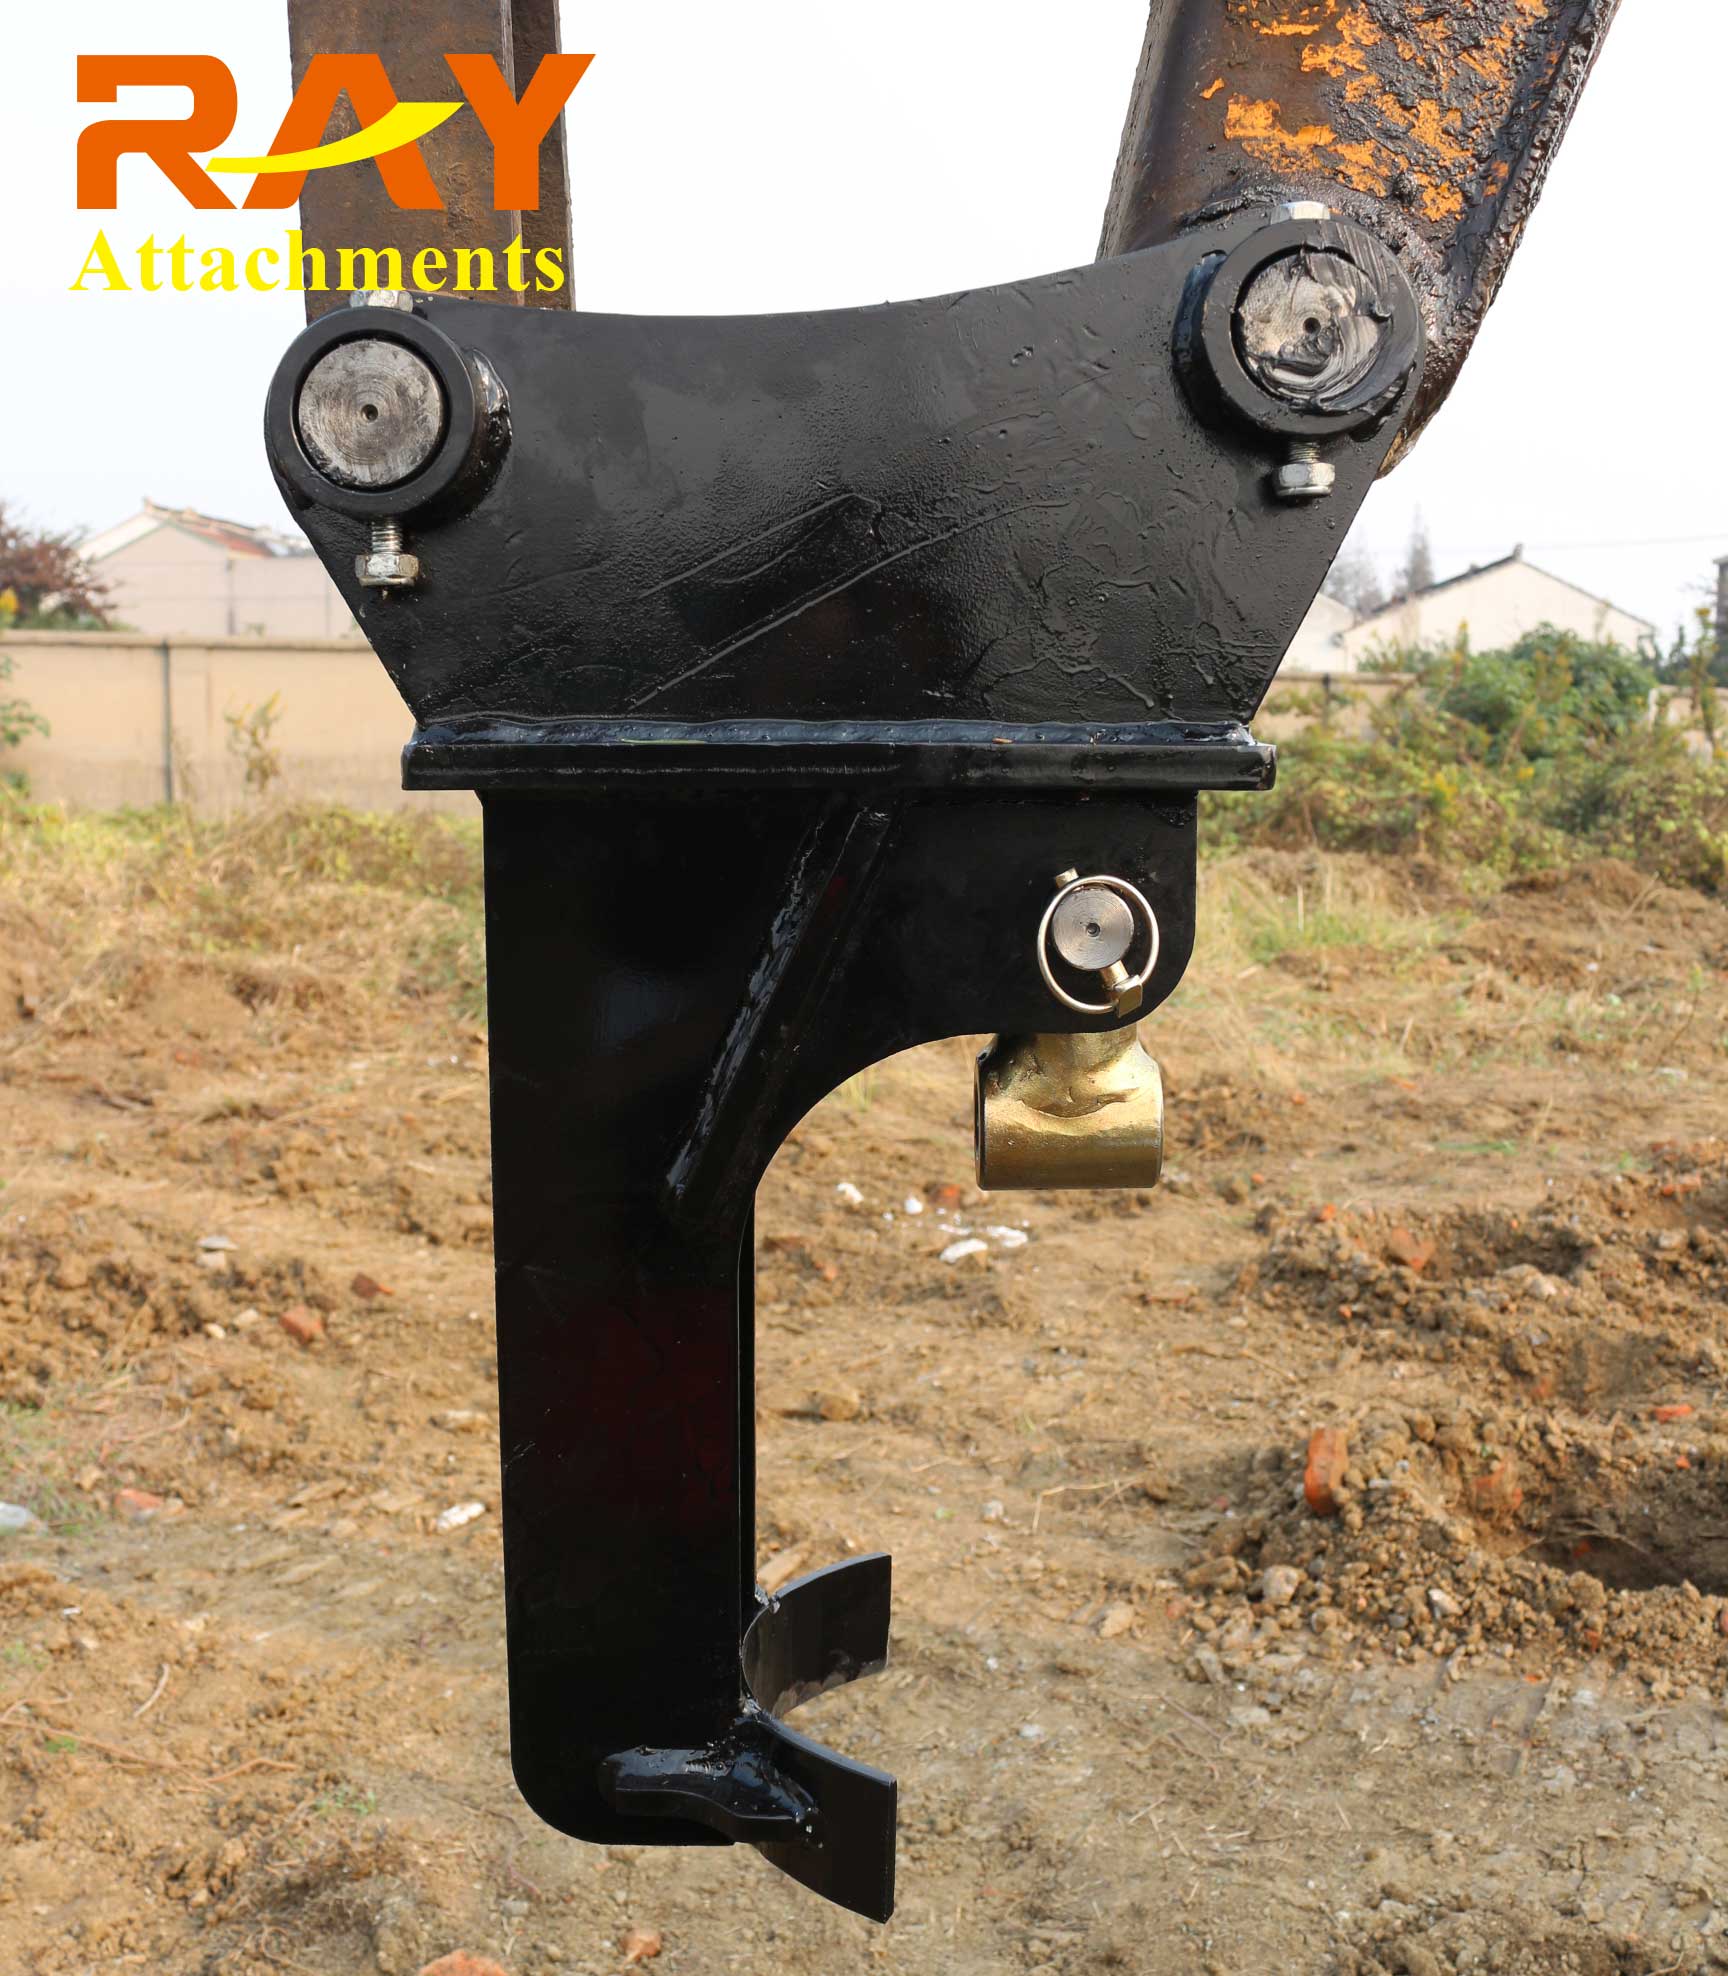 REA20000 model Earth Auger for excavator attachments